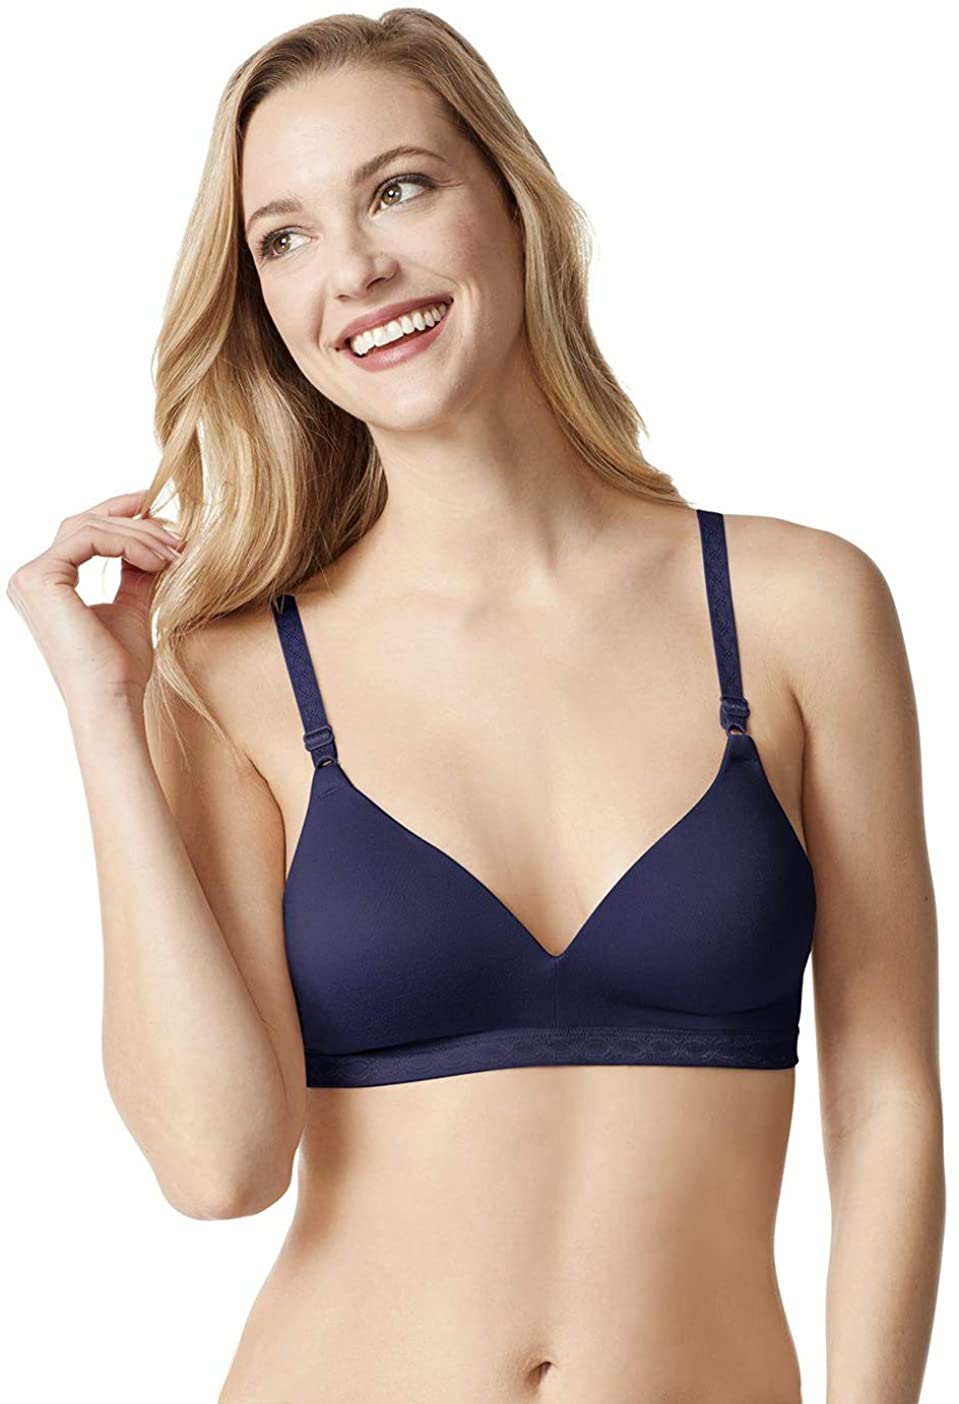 Warners Bras: Cloud 9 Wire Free Lace Band Contour Bra RO5691A